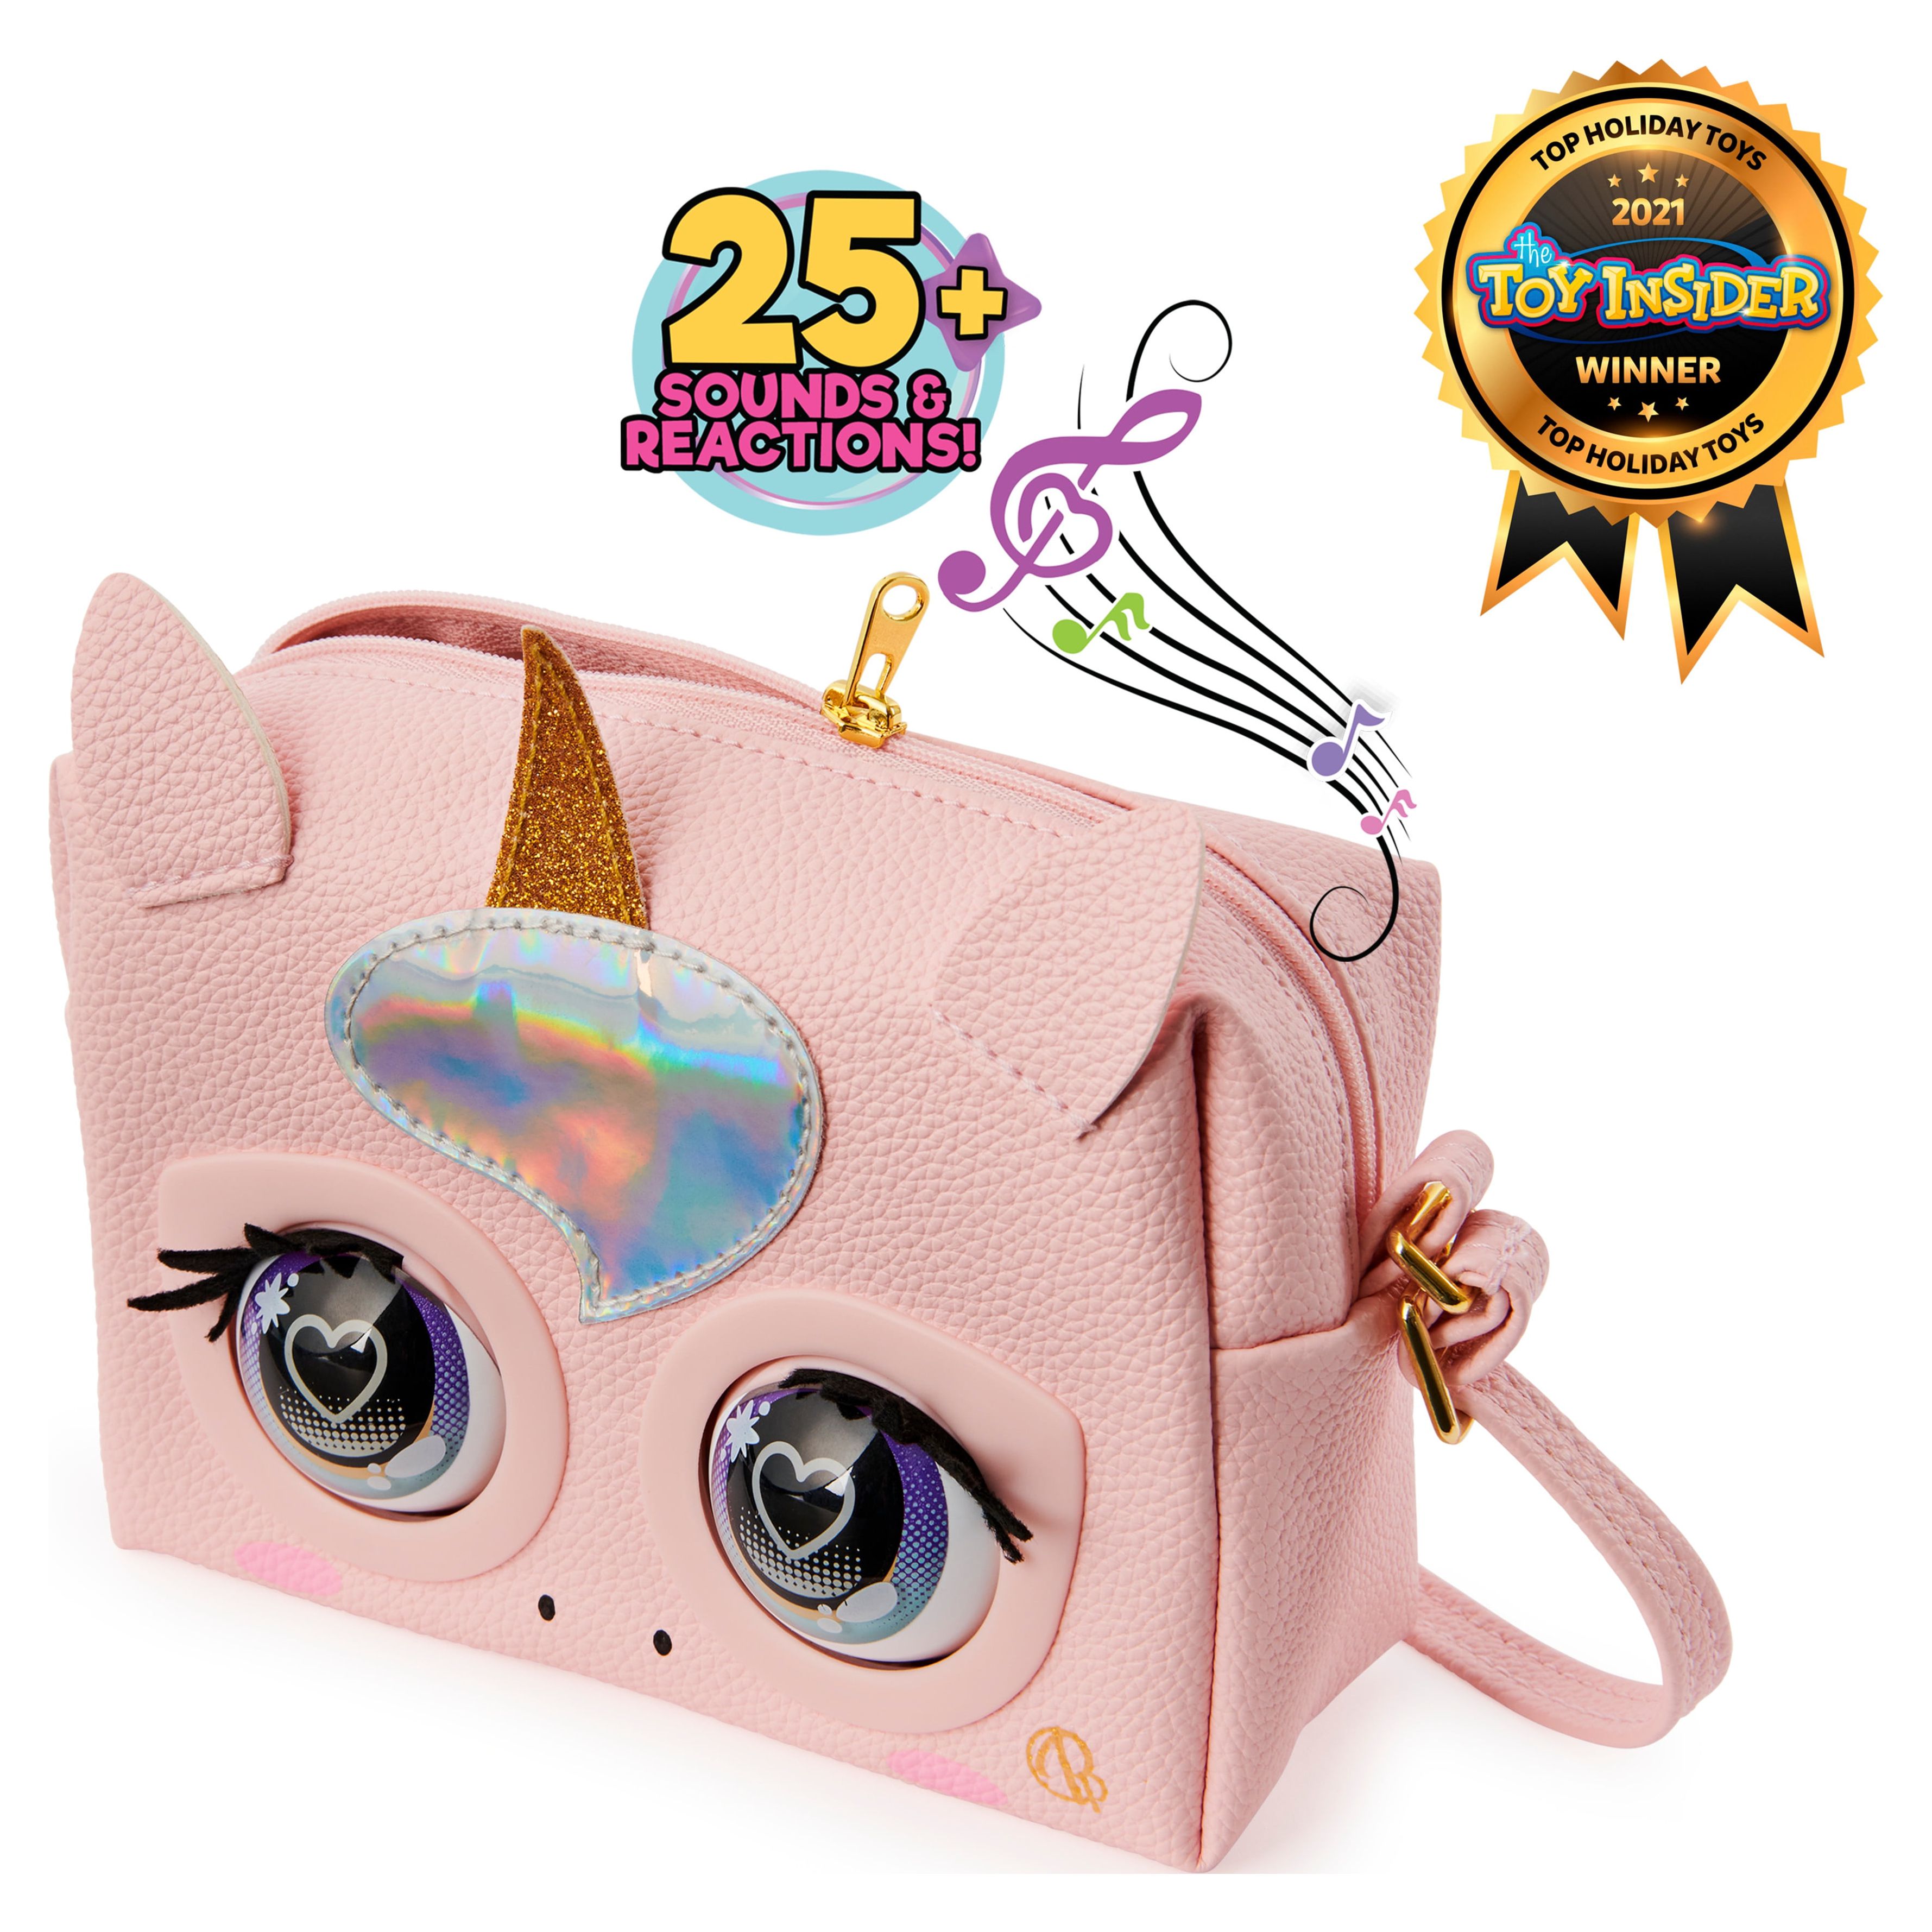 Purse Pets, Interactive Glamicorn with Over 25 Sounds and Reactions - image 3 of 8